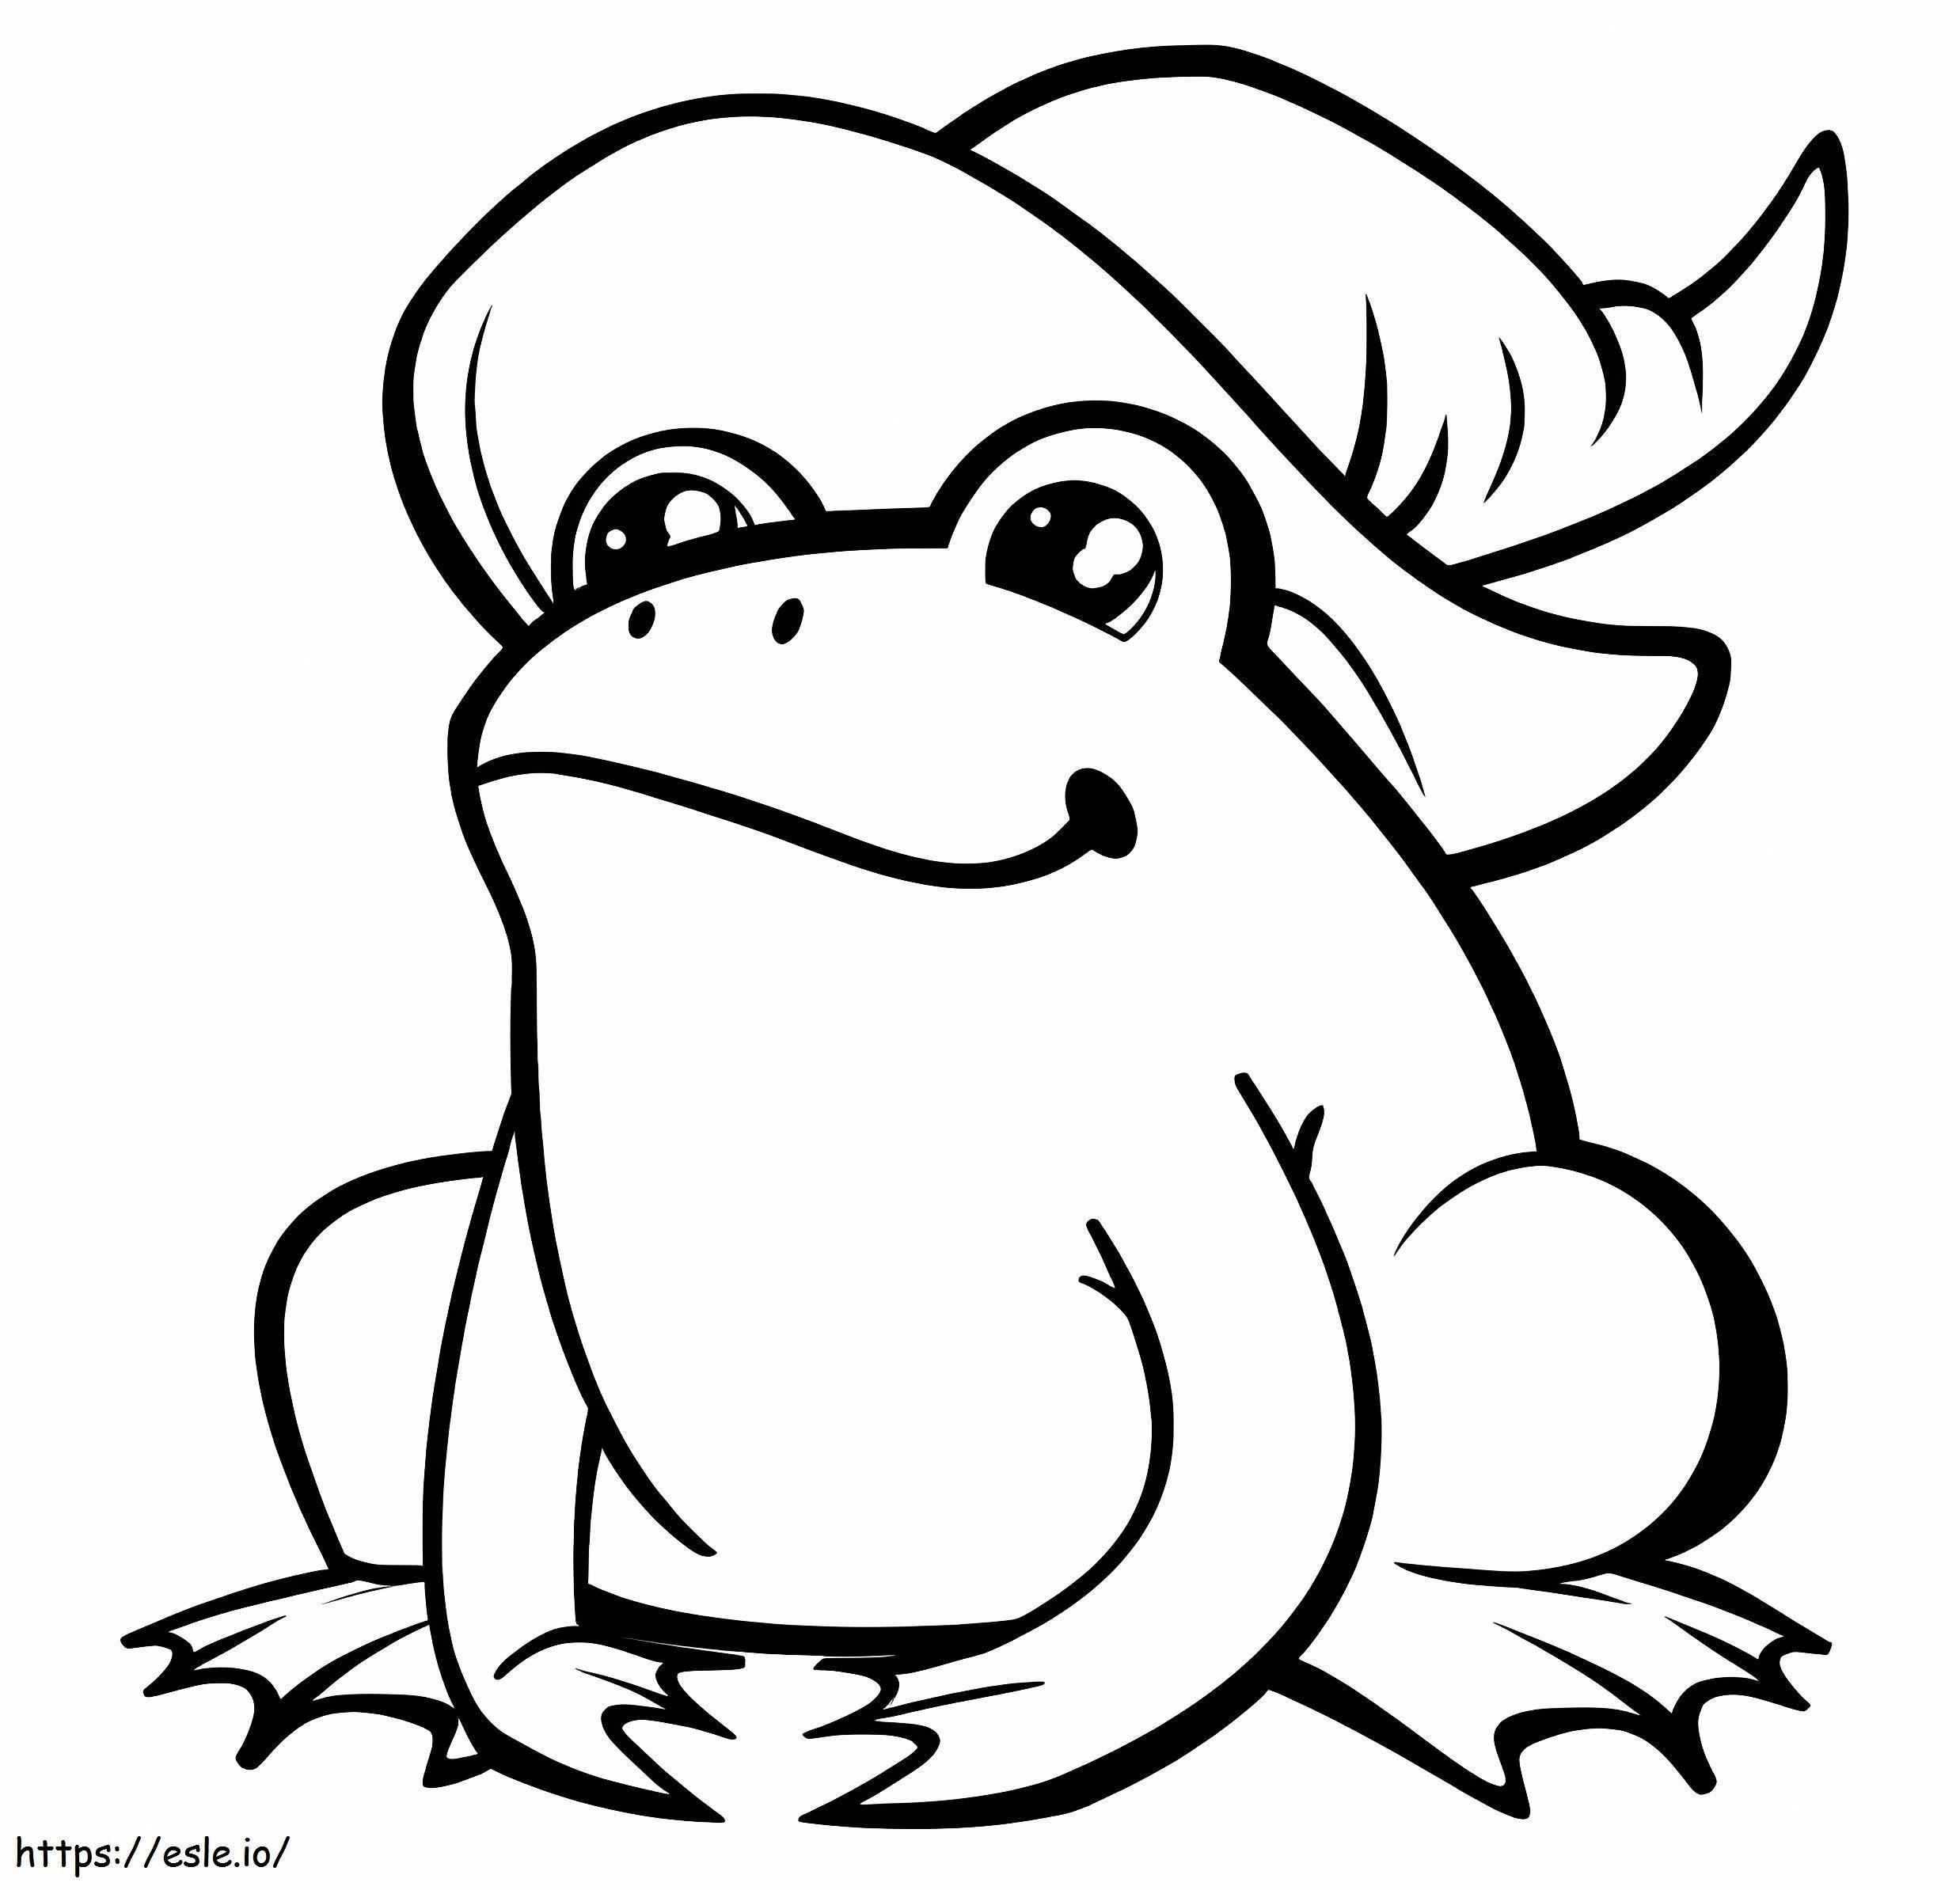 Frog Witch Smiling coloring page